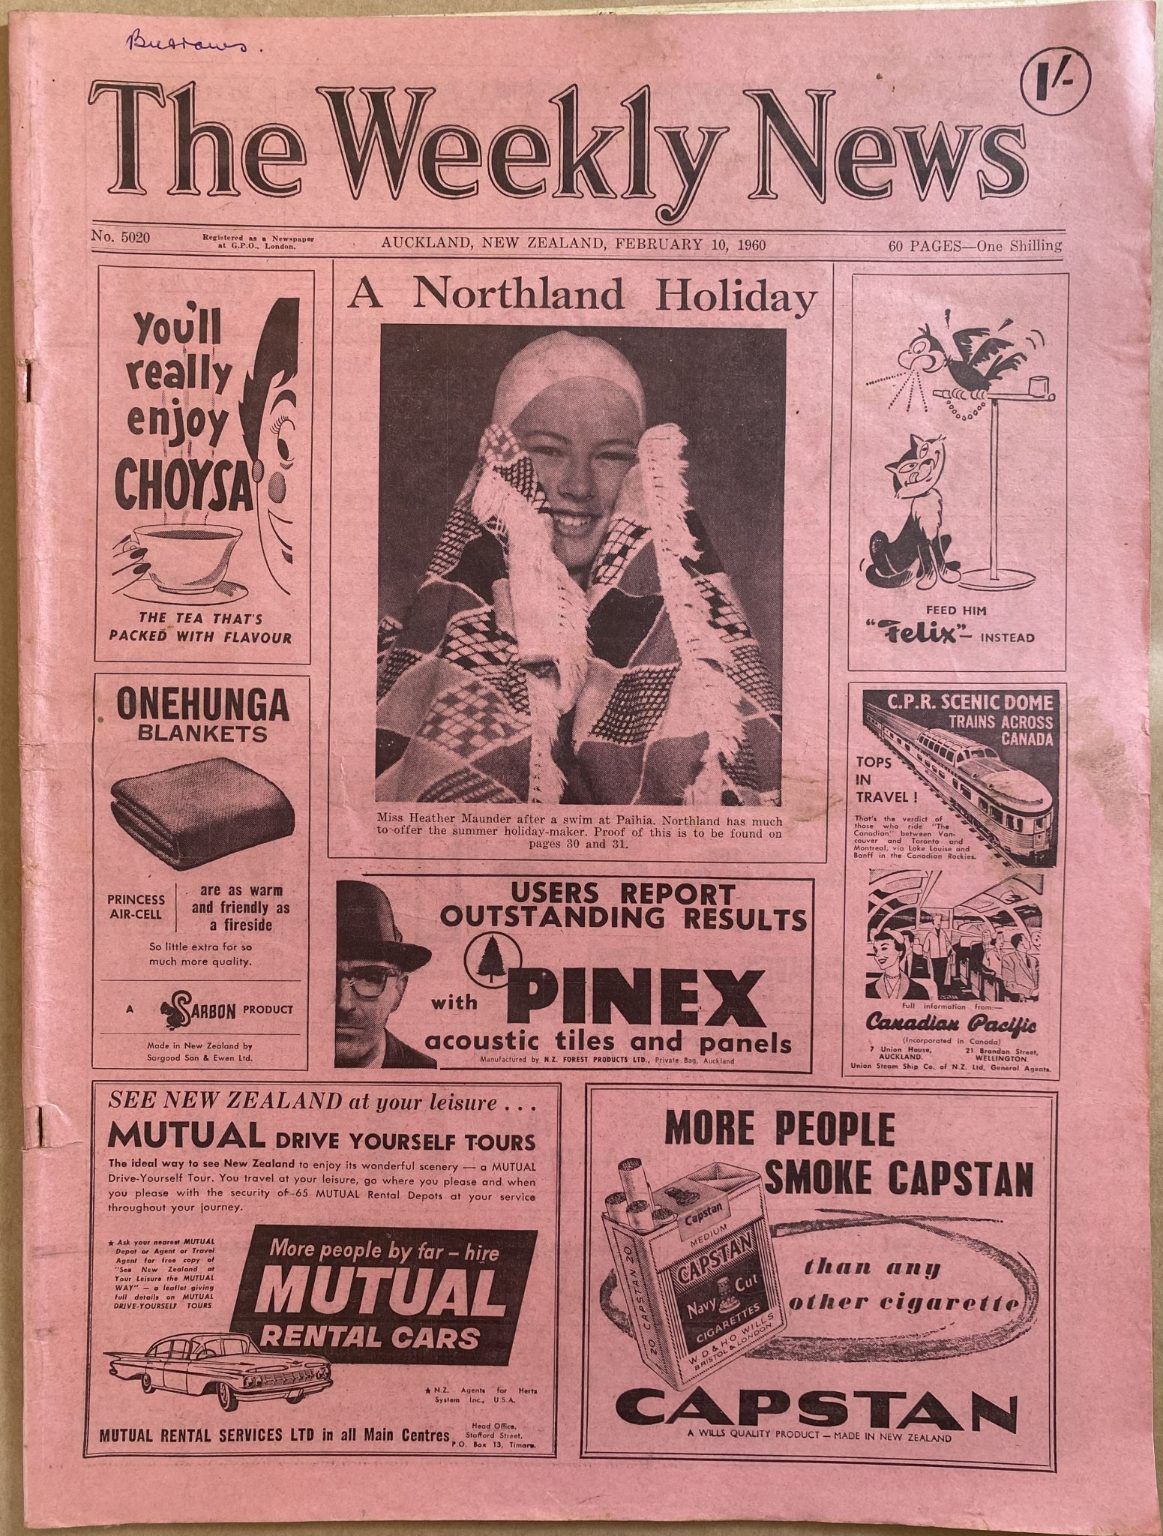 OLD NEWSPAPER: The Weekly News, No. 5020, 10 February 1960